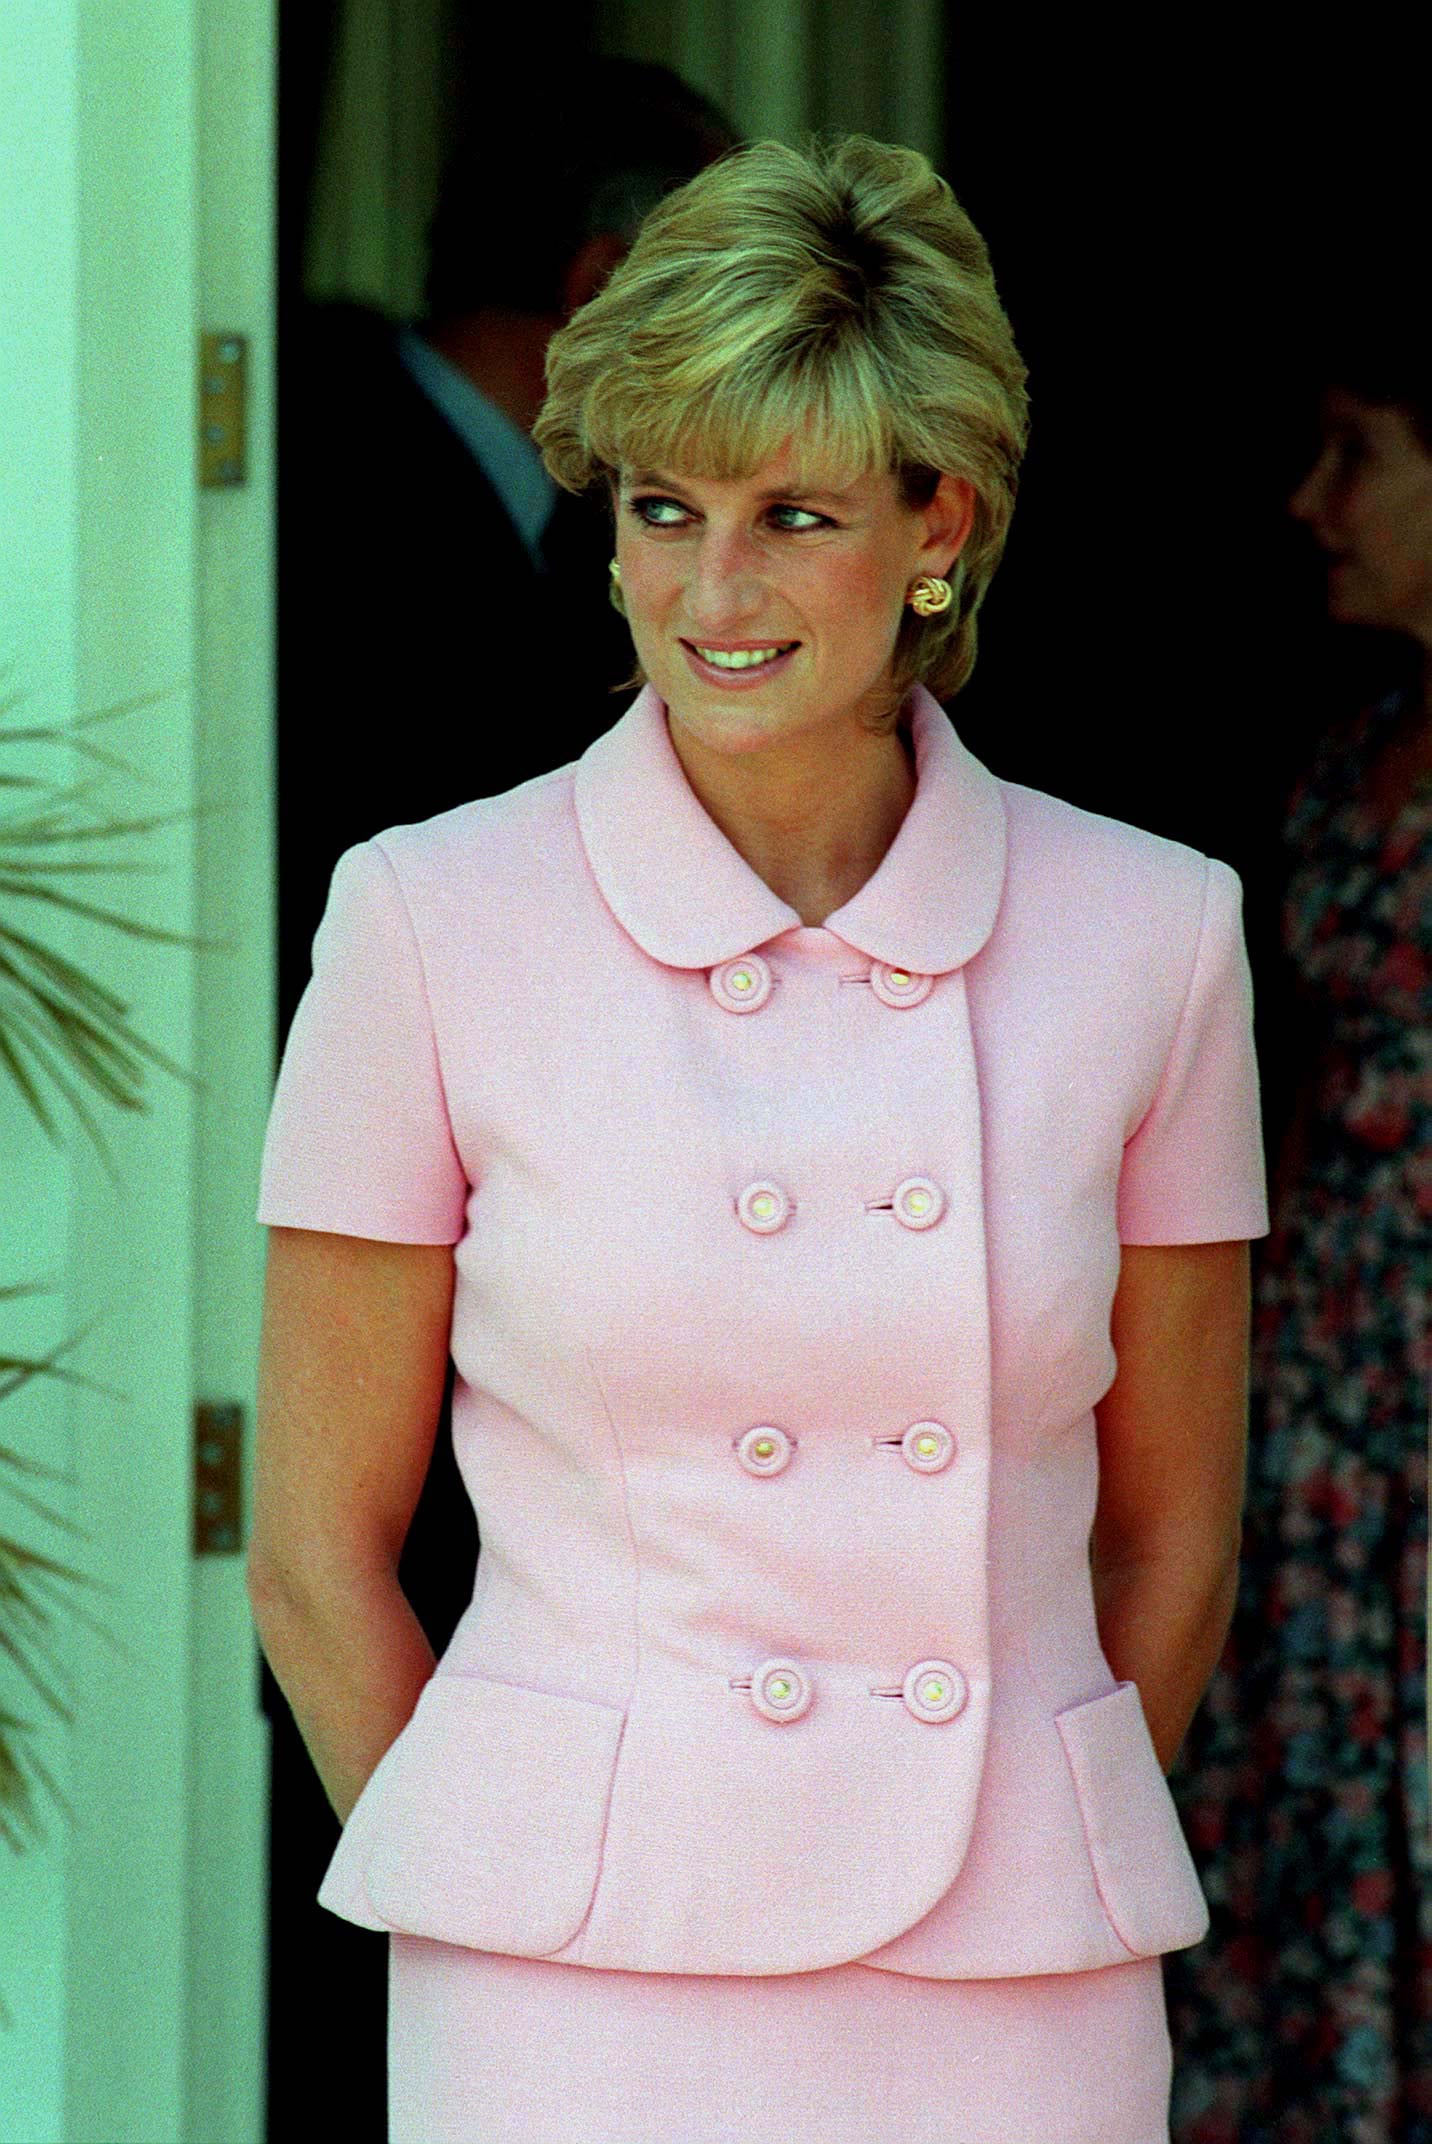 Looking perfectly monochromatic, Diana paired her pink getup with blush lipstick.